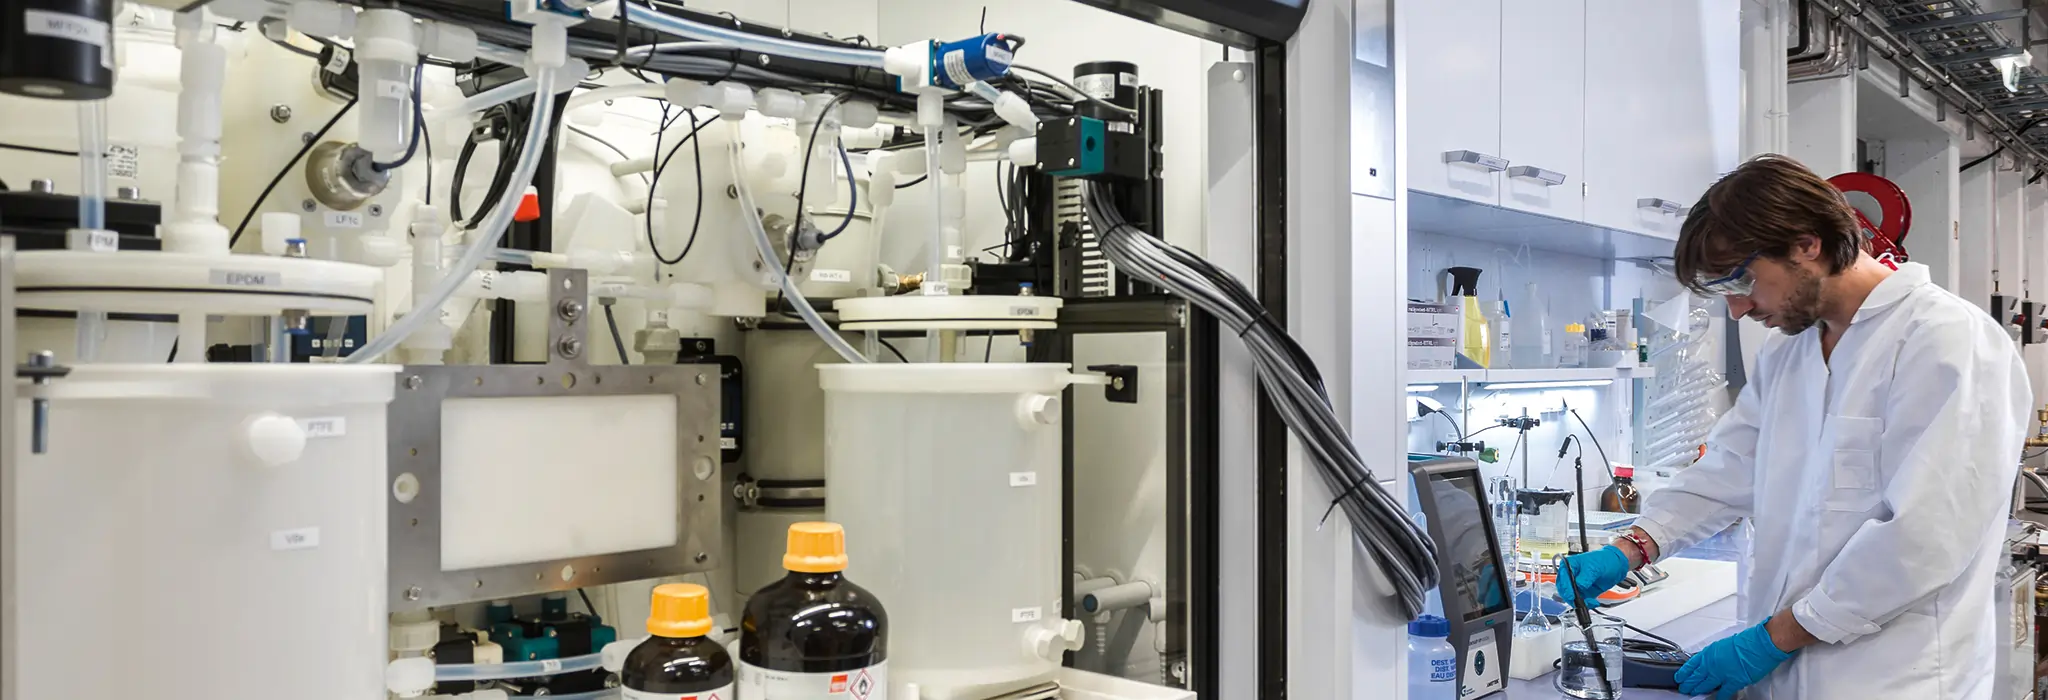 Meeting Challenges Within Lab Applications | Water Purification System